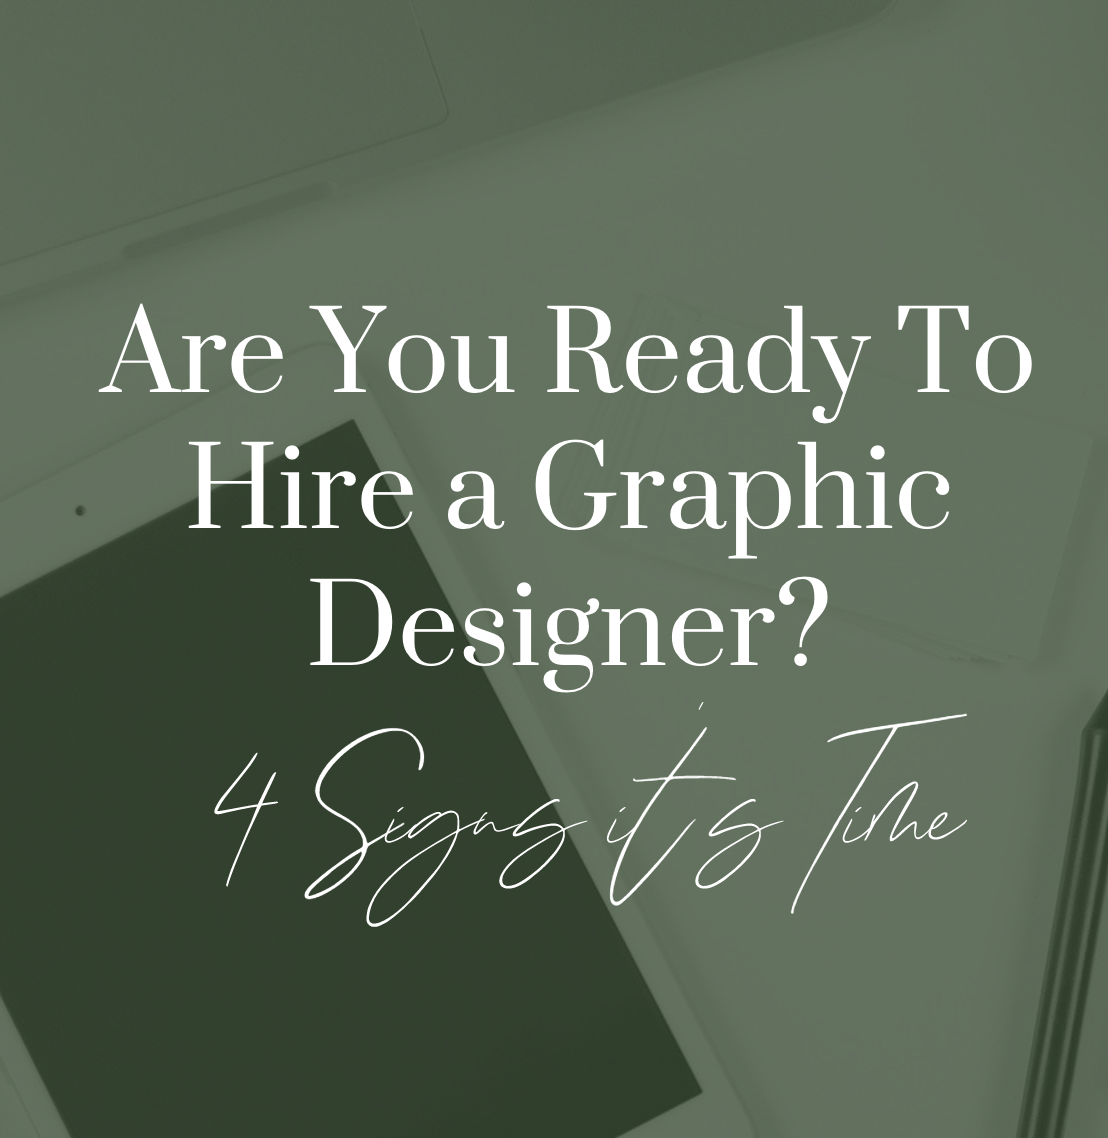 Is Your Business Ready for A Graphic Designer